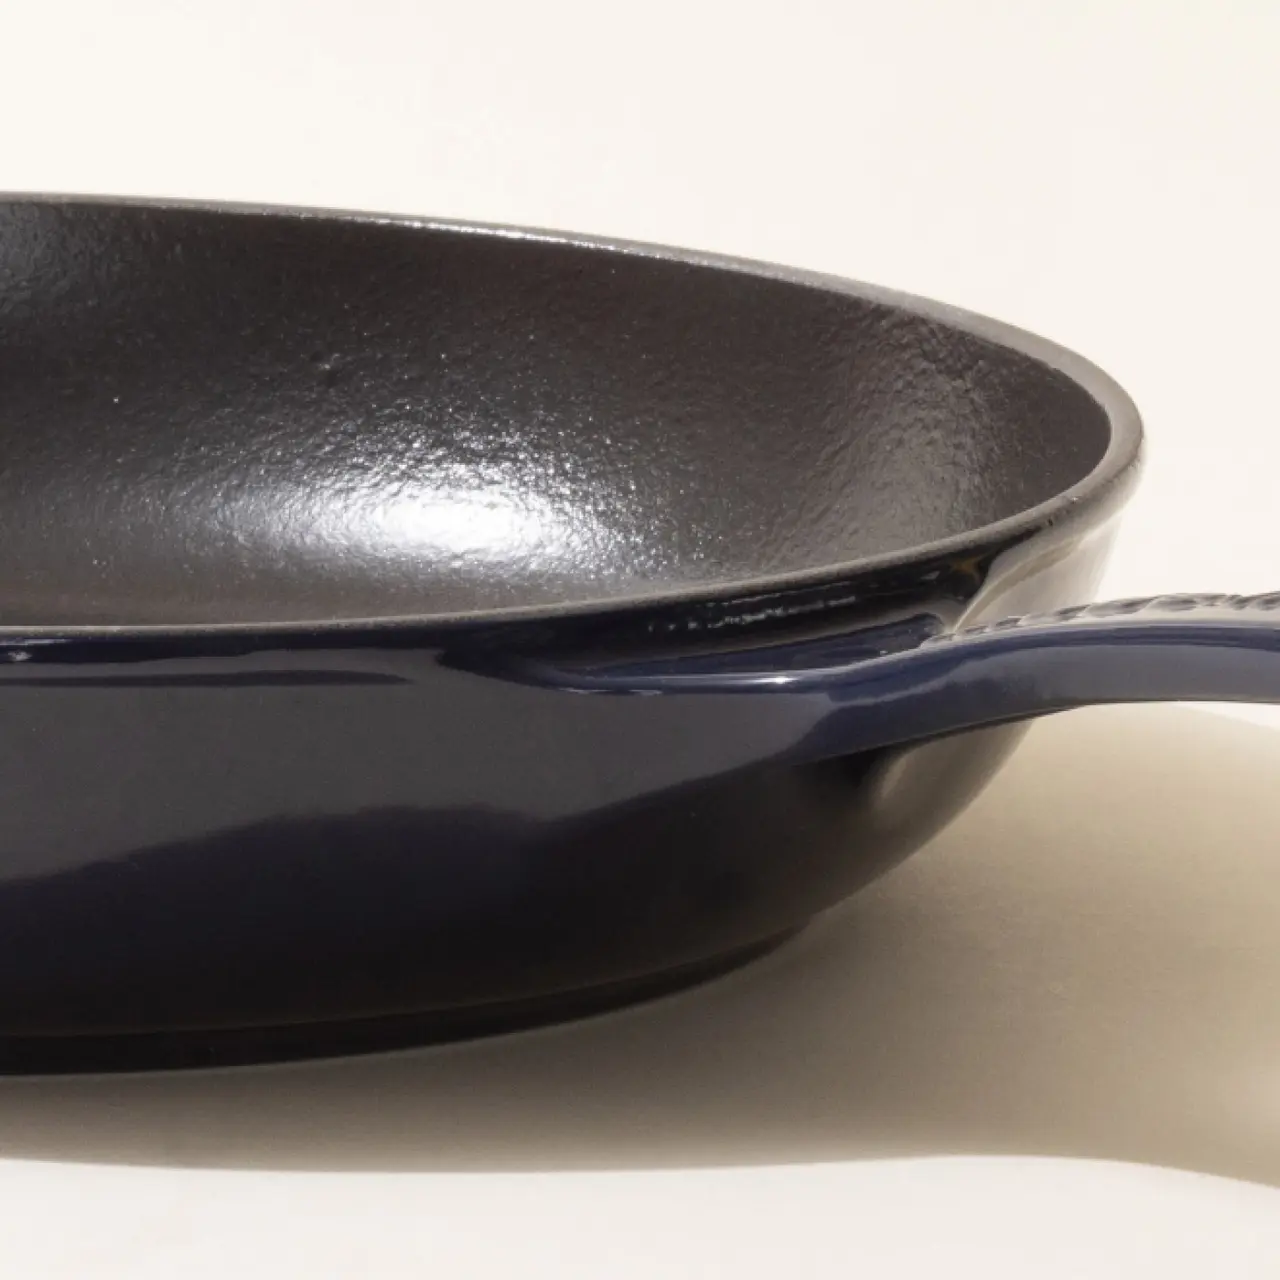 Valor 1.75 Qt. Galaxy Blue Enameled Cast Iron Sauce Pan with Cover